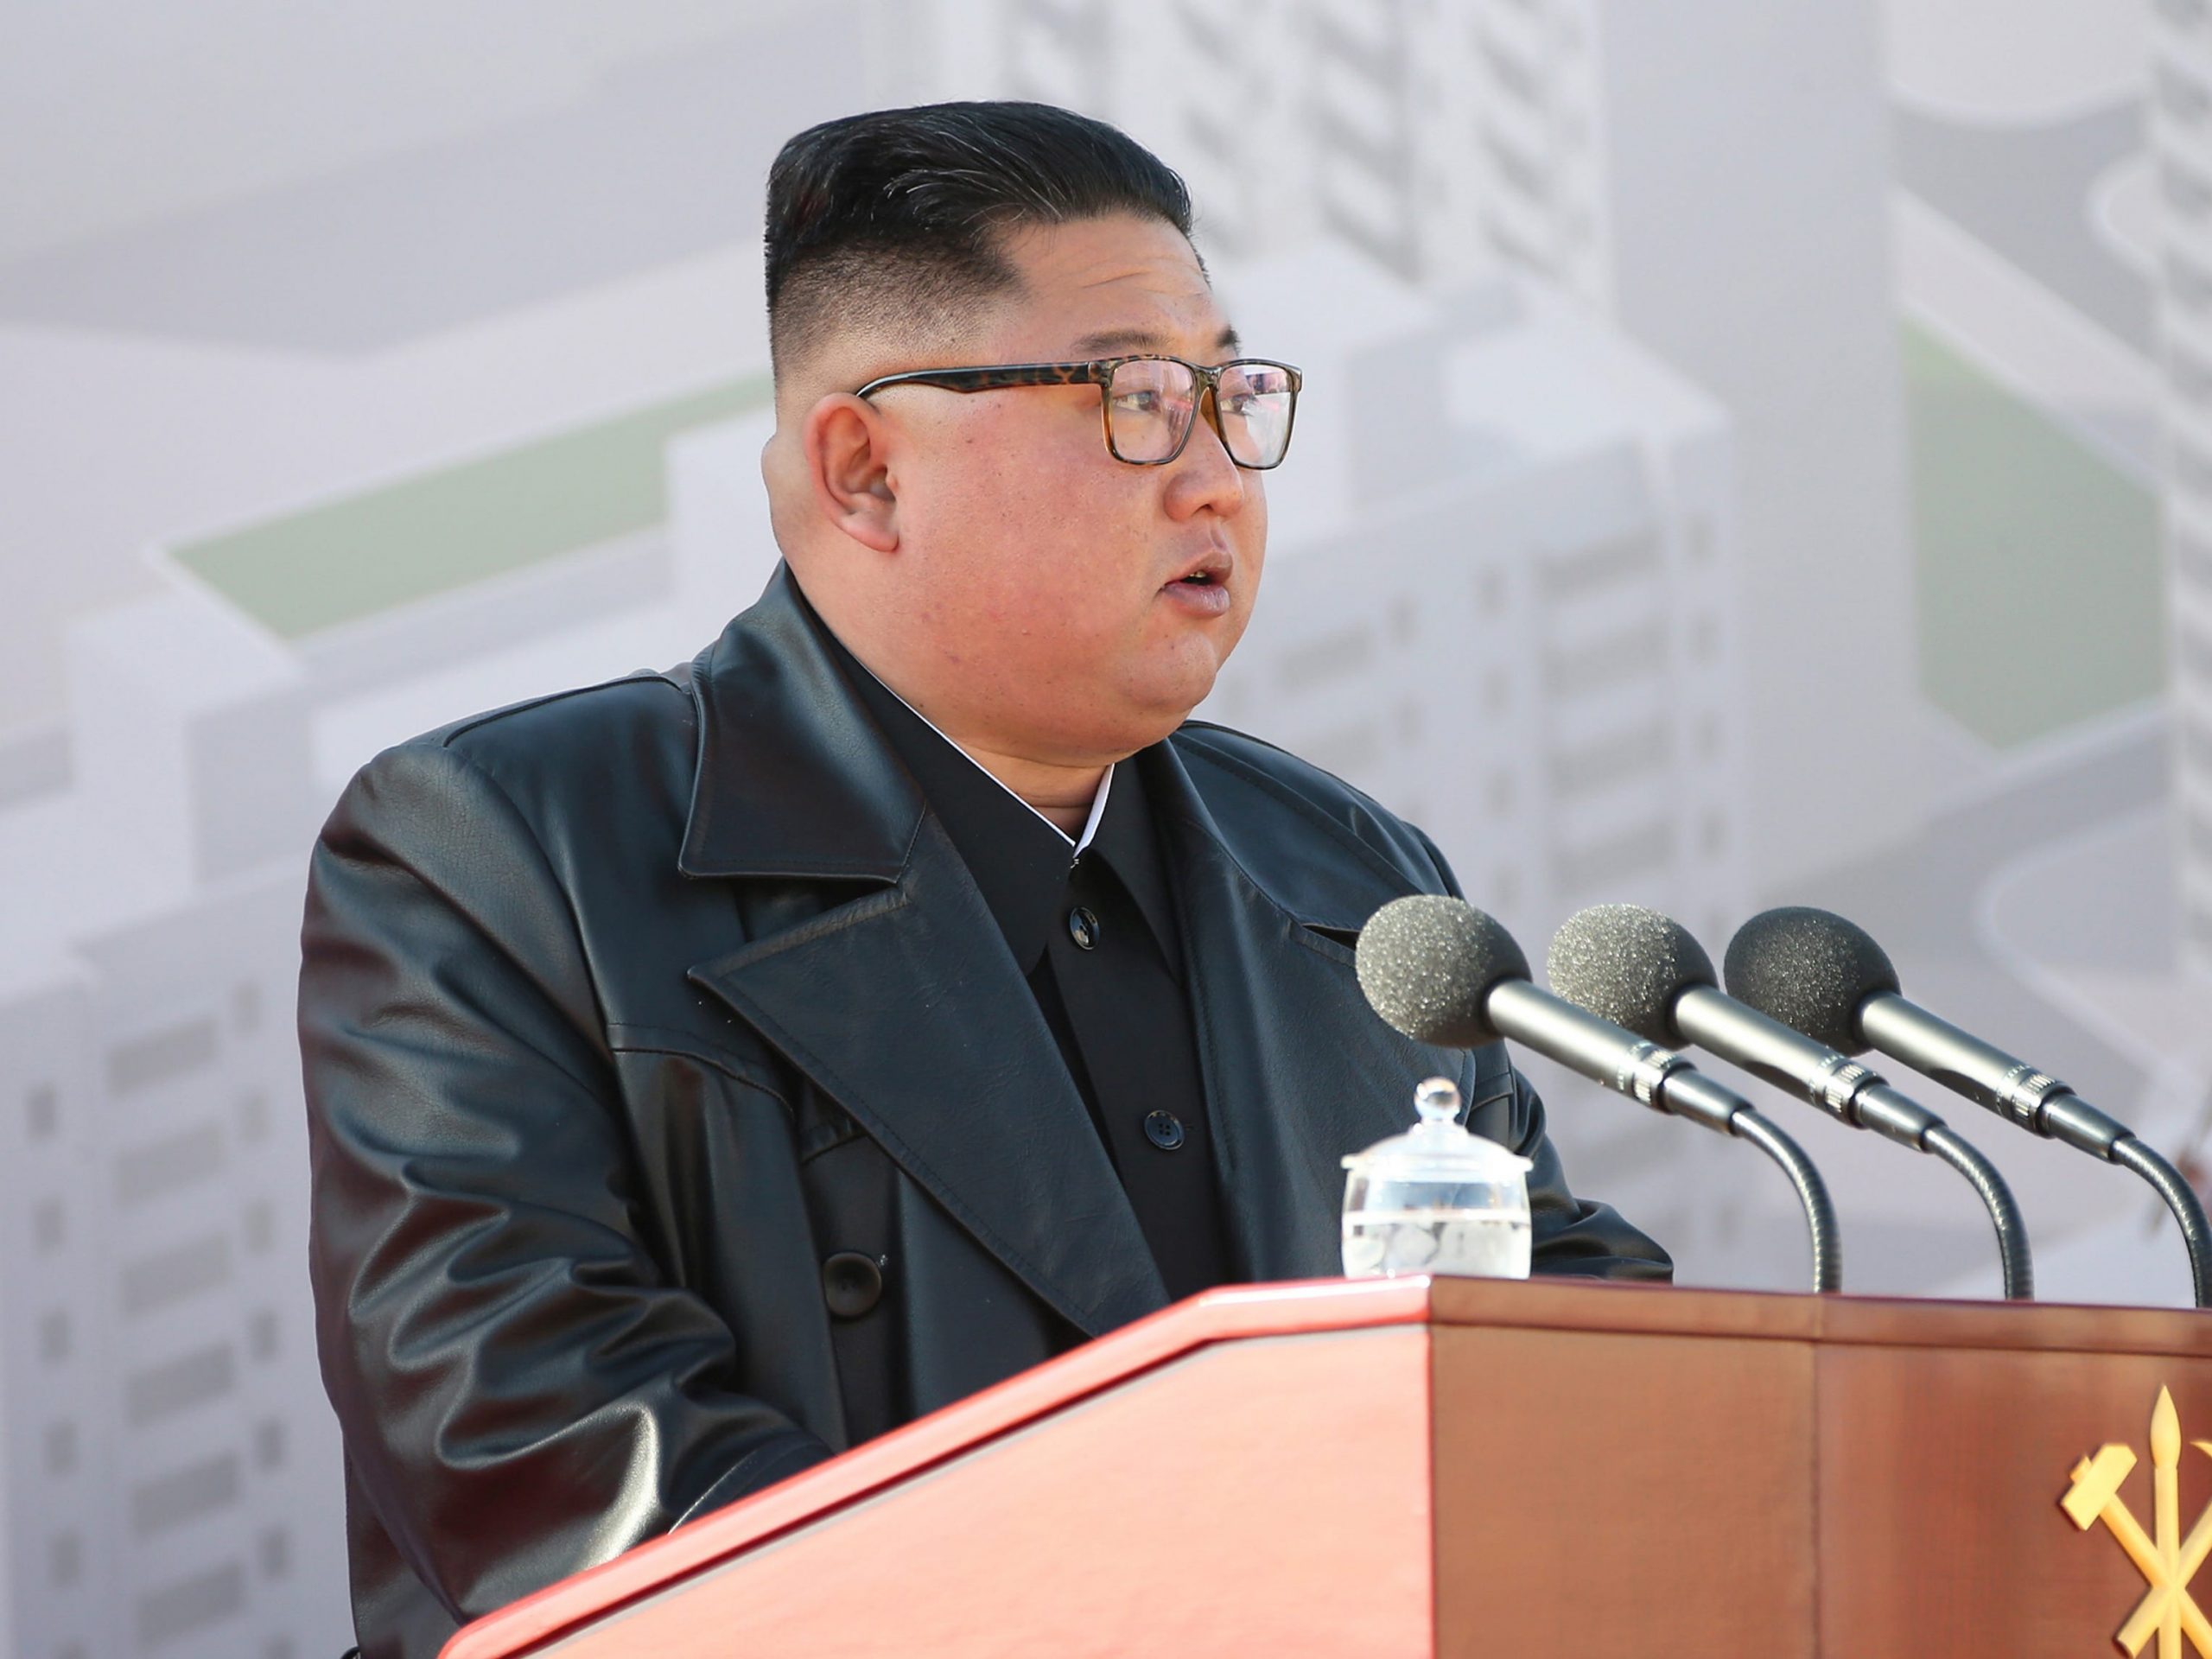 Kim Jong Un standing at a lectern, wearing a leather jacket.